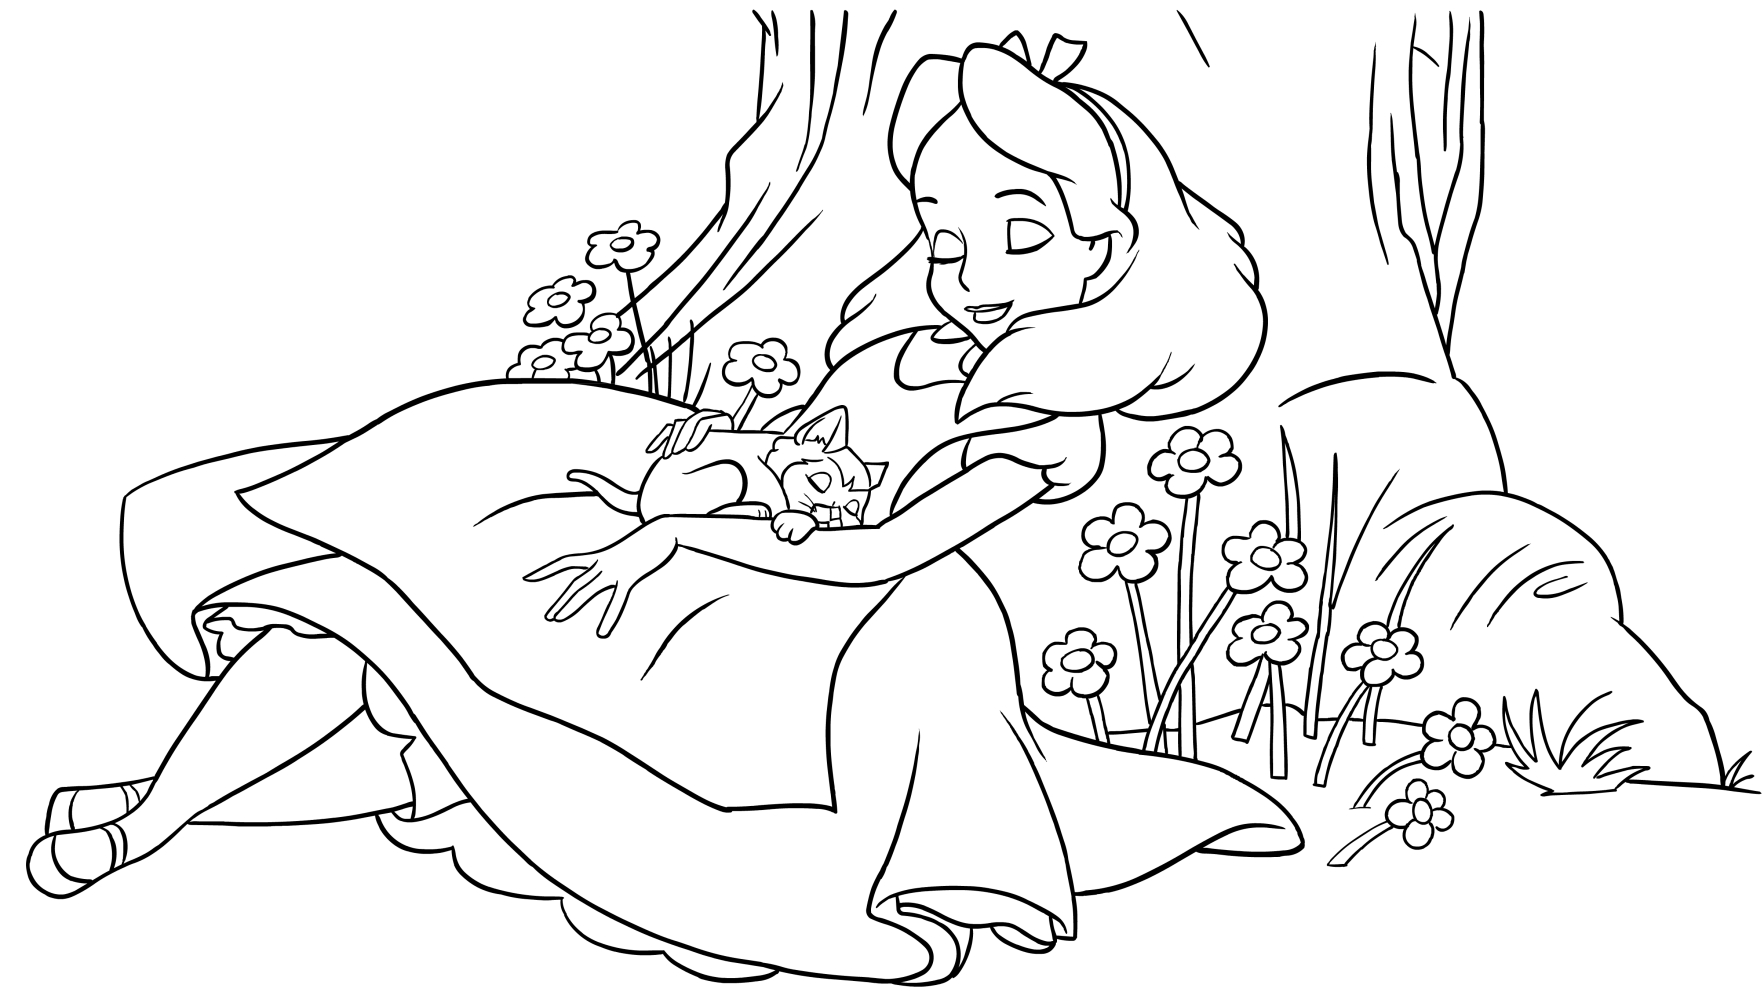  Alice sleeping with her cat, coloring page to print